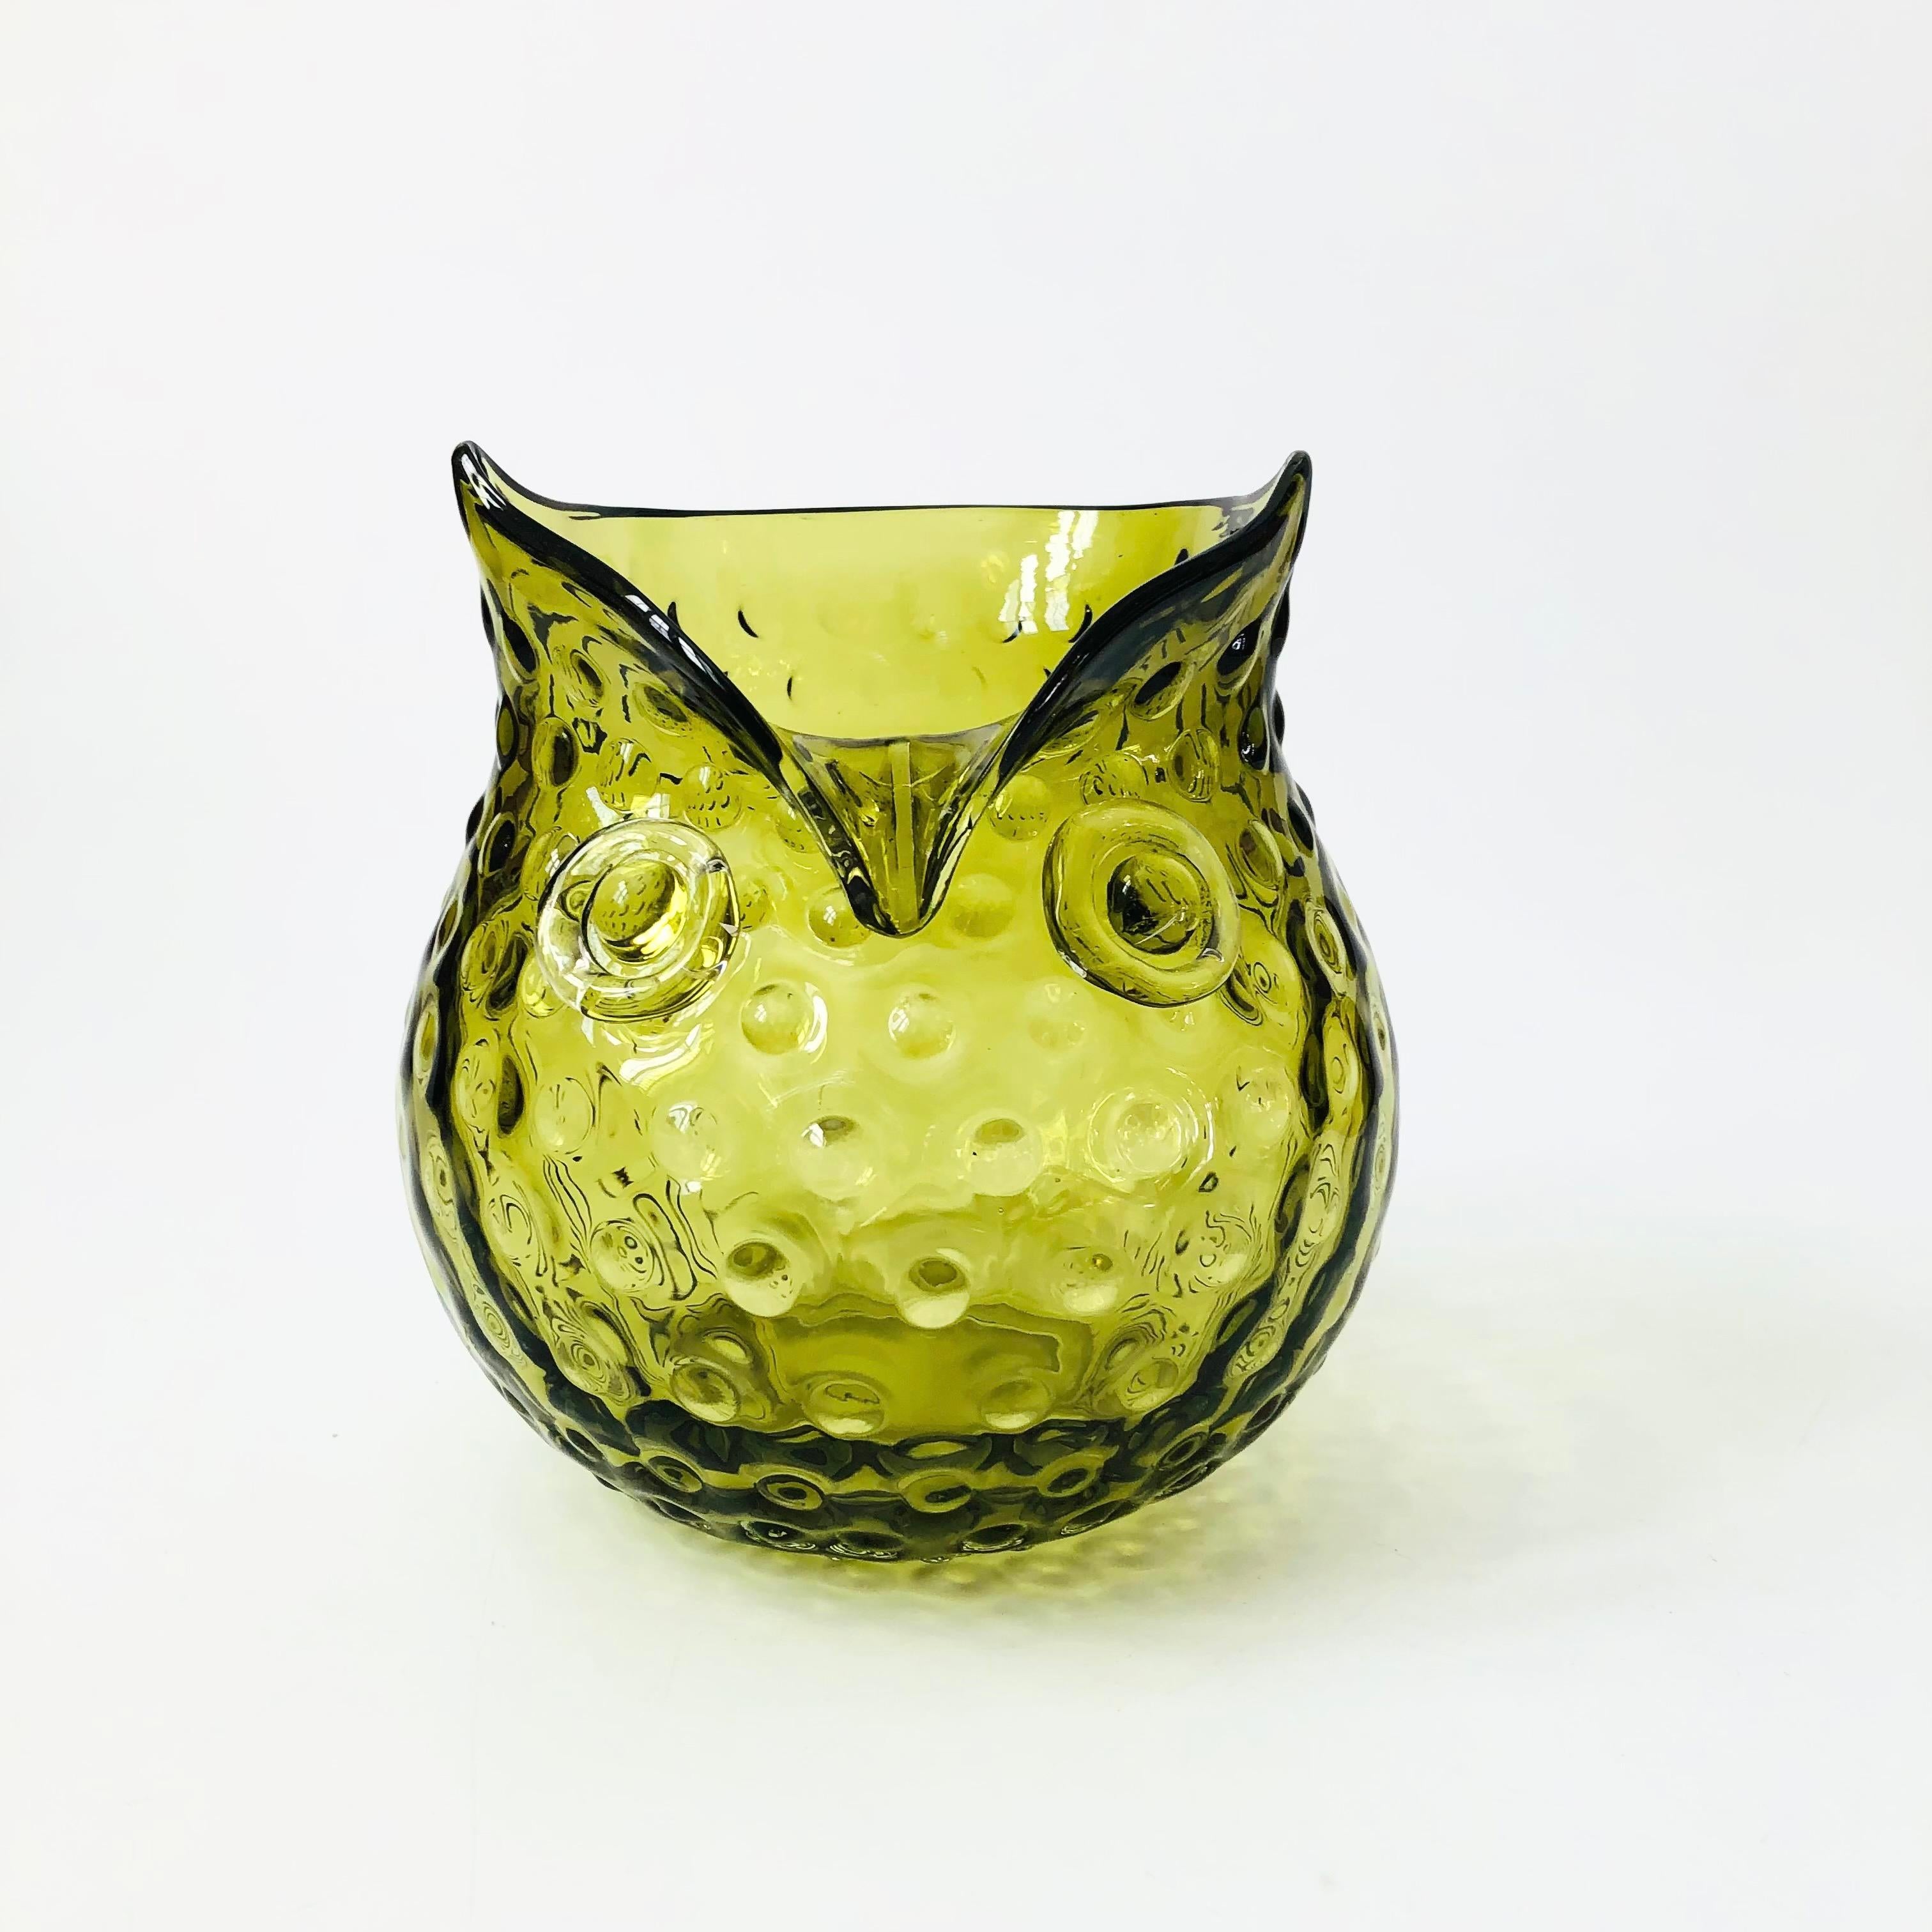 A wonderful mid century glass vase in the shape of an owl. Beautiful hobnail texture and green color to the glass.

